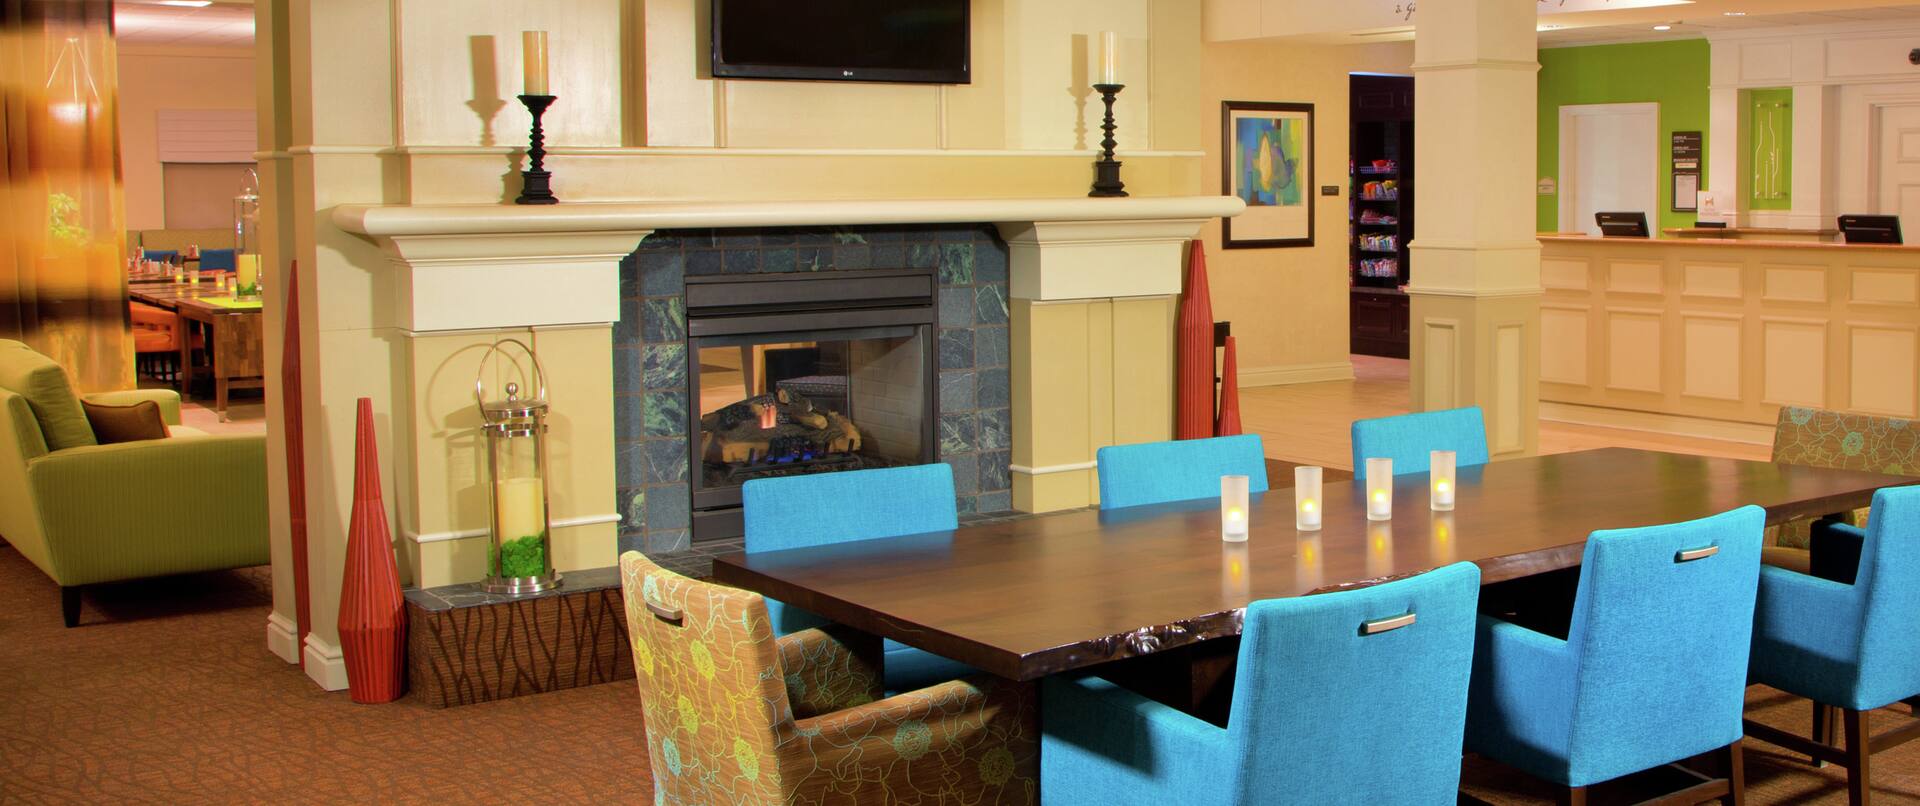 Seating for 8 at Lobby Conservatory Table in Lobby By Fireplace and TV